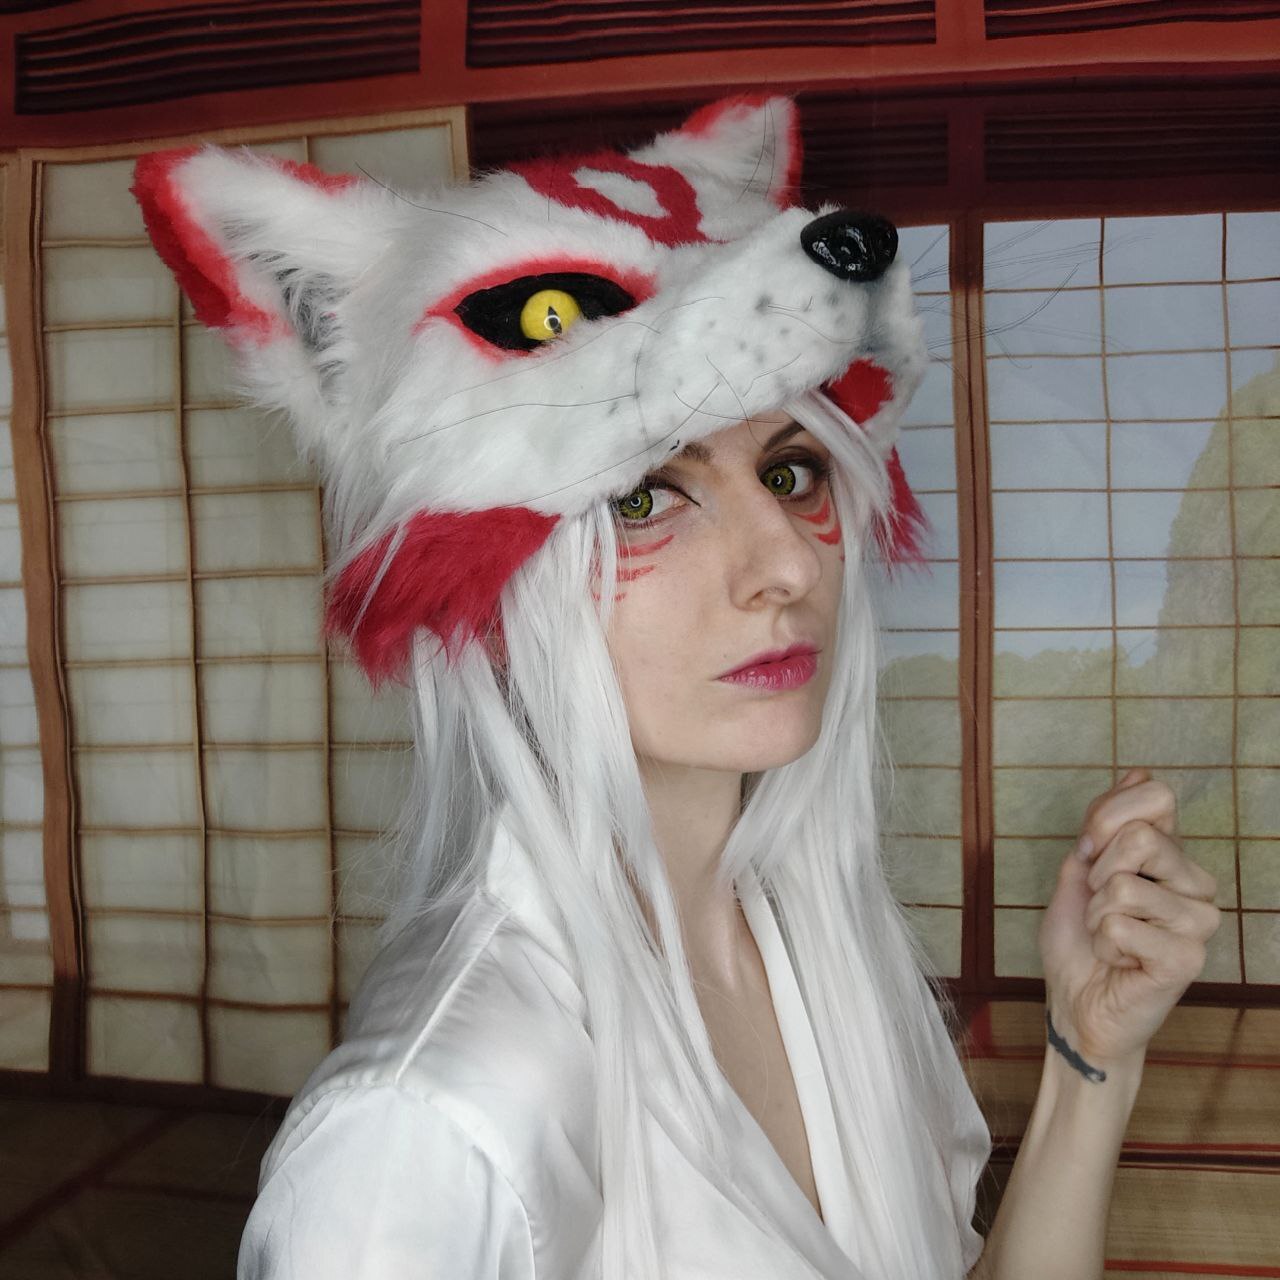 Half mask Kitsune - My, Accessories, Sewing, Decoration, With your own hands, Mask, Kitsune, Fox, Friday tag is mine, Cosplay, Cosplayers, Polymer clay, Fur, Fur products, Masquerade, Shamans, Mythology, Japanese mythology, Longpost